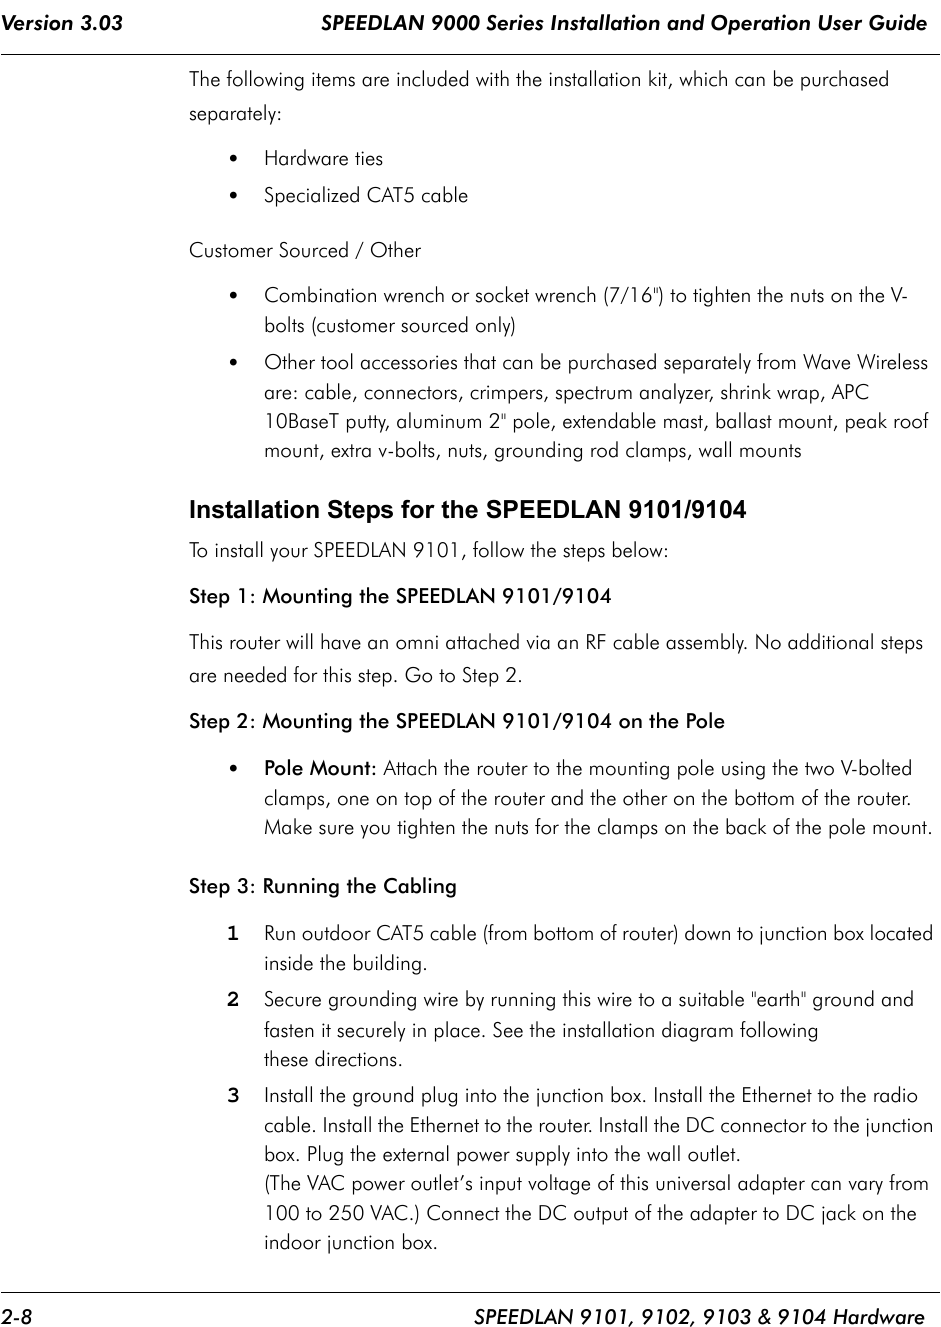 Version 3.03                                SPEEDLAN 9000 Series Installation and Operation User Guide 2-8 SPEEDLAN 9101, 9102, 9103 &amp; 9104 HardwareThe following items are included with the installation kit, which can be purchased separately:•Hardware ties •Specialized CAT5 cableCustomer Sourced / Other•Combination wrench or socket wrench (7/16&quot;) to tighten the nuts on the V-bolts (customer sourced only)•Other tool accessories that can be purchased separately from Wave Wireless are: cable, connectors, crimpers, spectrum analyzer, shrink wrap, APC 10BaseT putty, aluminum 2&quot; pole, extendable mast, ballast mount, peak roof mount, extra v-bolts, nuts, grounding rod clamps, wall mountsInstallation Steps for the SPEEDLAN 9101/9104 To install your SPEEDLAN 9101, follow the steps below: Step 1: Mounting the SPEEDLAN 9101/9104  This router will have an omni attached via an RF cable assembly. No additional steps are needed for this step. Go to Step 2. Step 2: Mounting the SPEEDLAN 9101/9104 on the Pole•Pole Mount: Attach the router to the mounting pole using the two V-bolted clamps, one on top of the router and the other on the bottom of the router. Make sure you tighten the nuts for the clamps on the back of the pole mount.Step 3: Running the Cabling 1Run outdoor CAT5 cable (from bottom of router) down to junction box located inside the building. 2Secure grounding wire by running this wire to a suitable &quot;earth&quot; ground and fasten it securely in place. See the installation diagram following these directions.3Install the ground plug into the junction box. Install the Ethernet to the radio cable. Install the Ethernet to the router. Install the DC connector to the junction box. Plug the external power supply into the wall outlet.(The VAC power outlet’s input voltage of this universal adapter can vary from 100 to 250 VAC.) Connect the DC output of the adapter to DC jack on the indoor junction box.